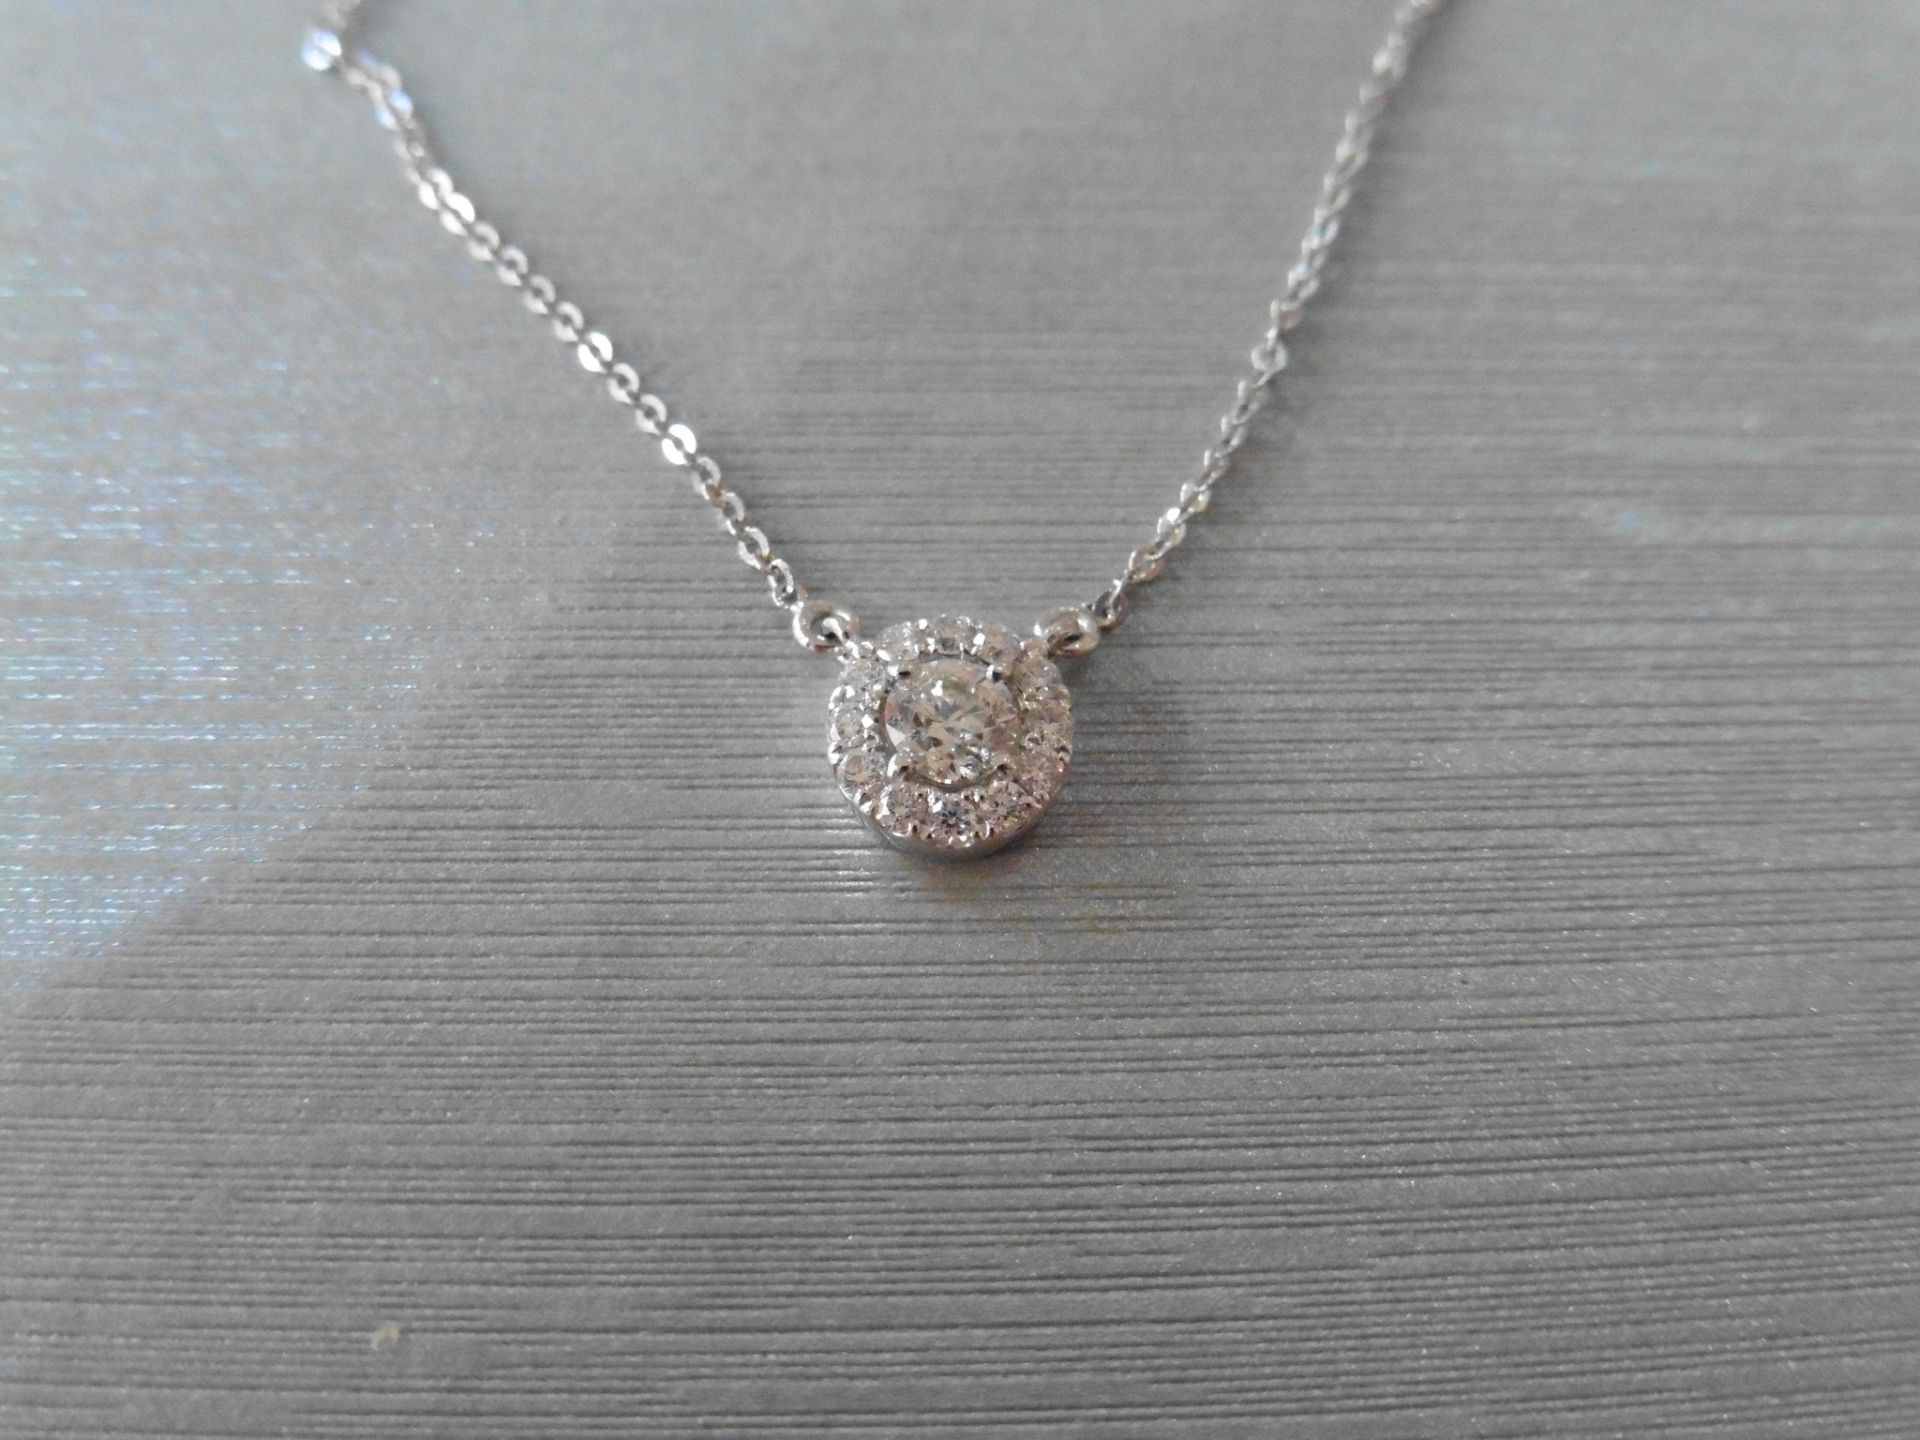 18ct white gold diamond pendant. Set with a centred 0.30ct russian cut diamond, H colour and SI2